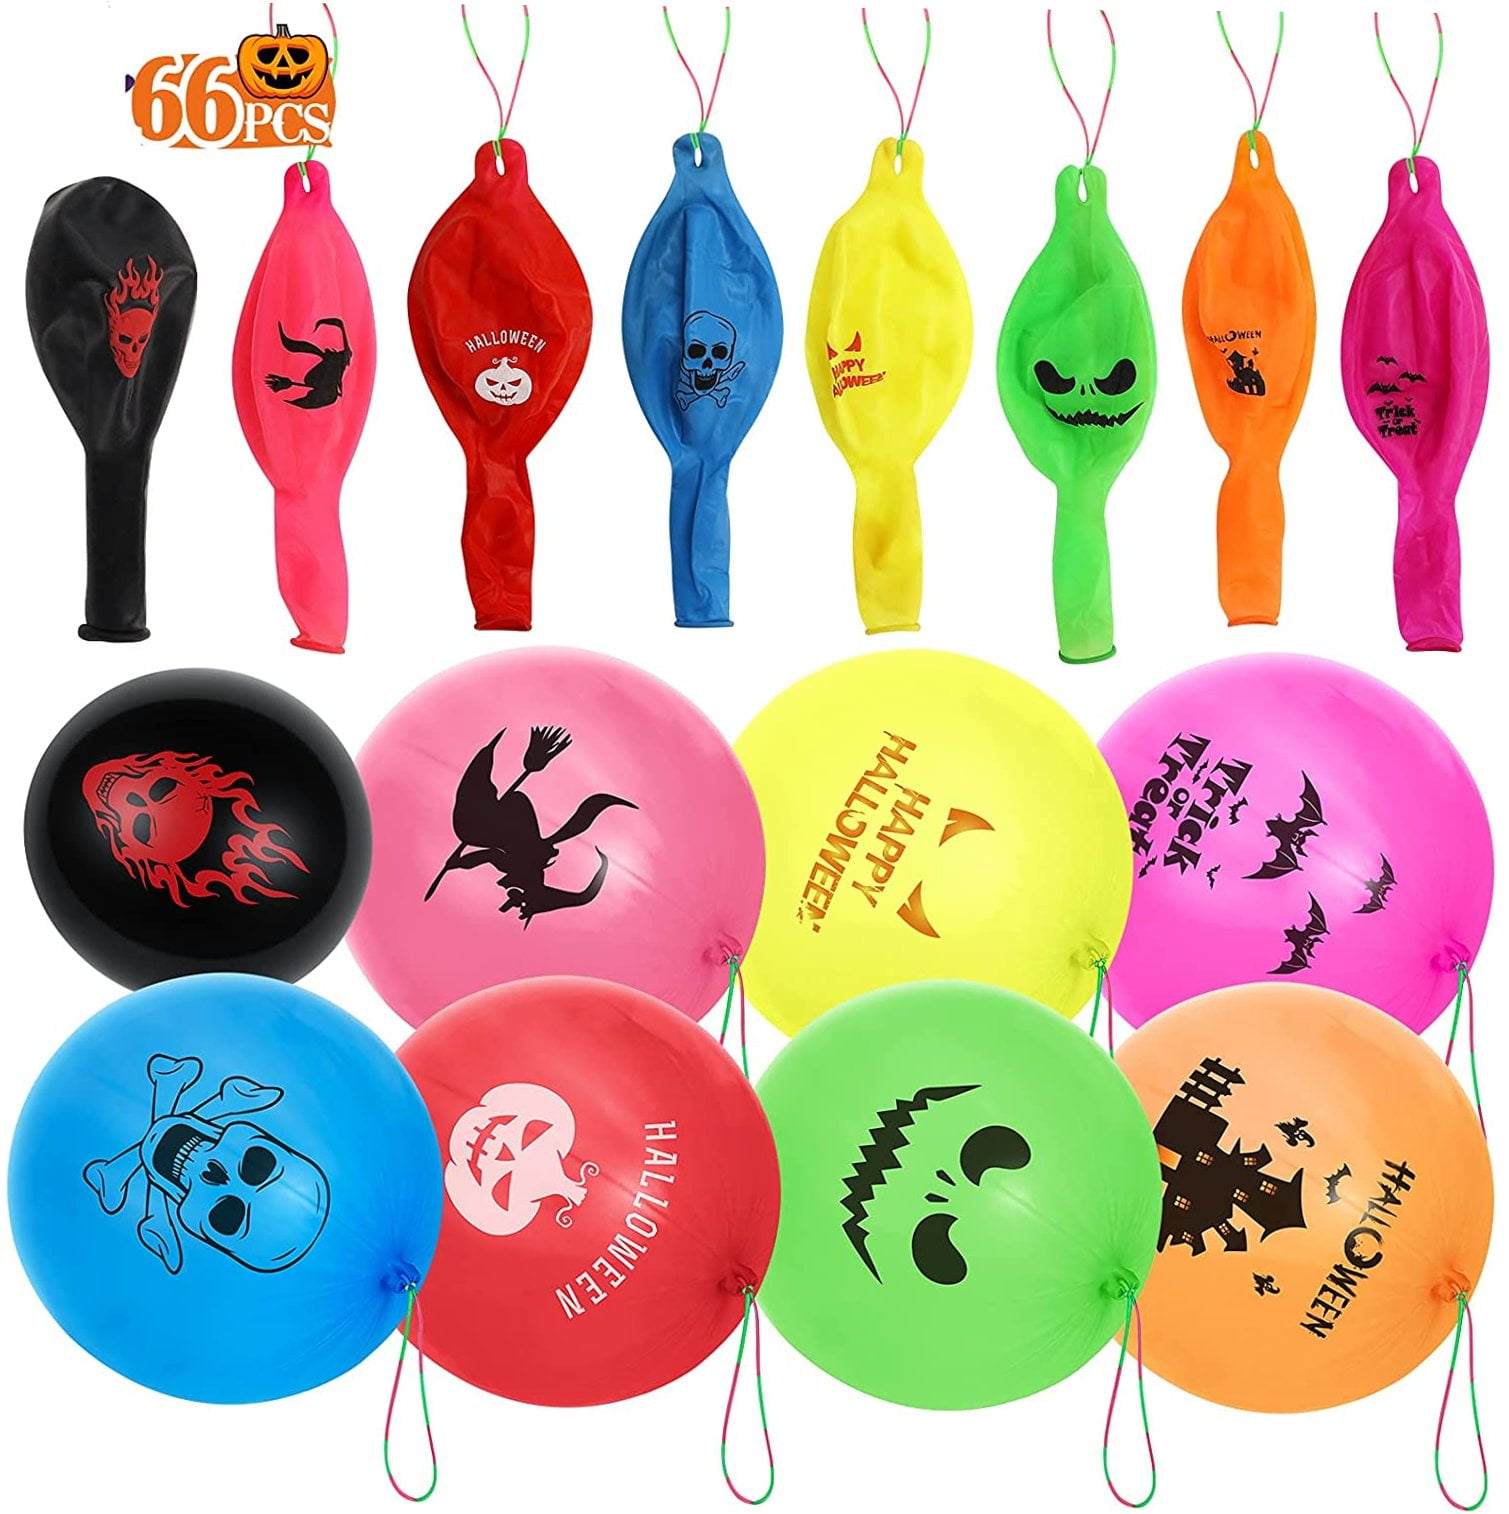 Details about   35Pcs Physical Exercise Kids Toys Punching Ball Balloons with Rubber Band Handle 